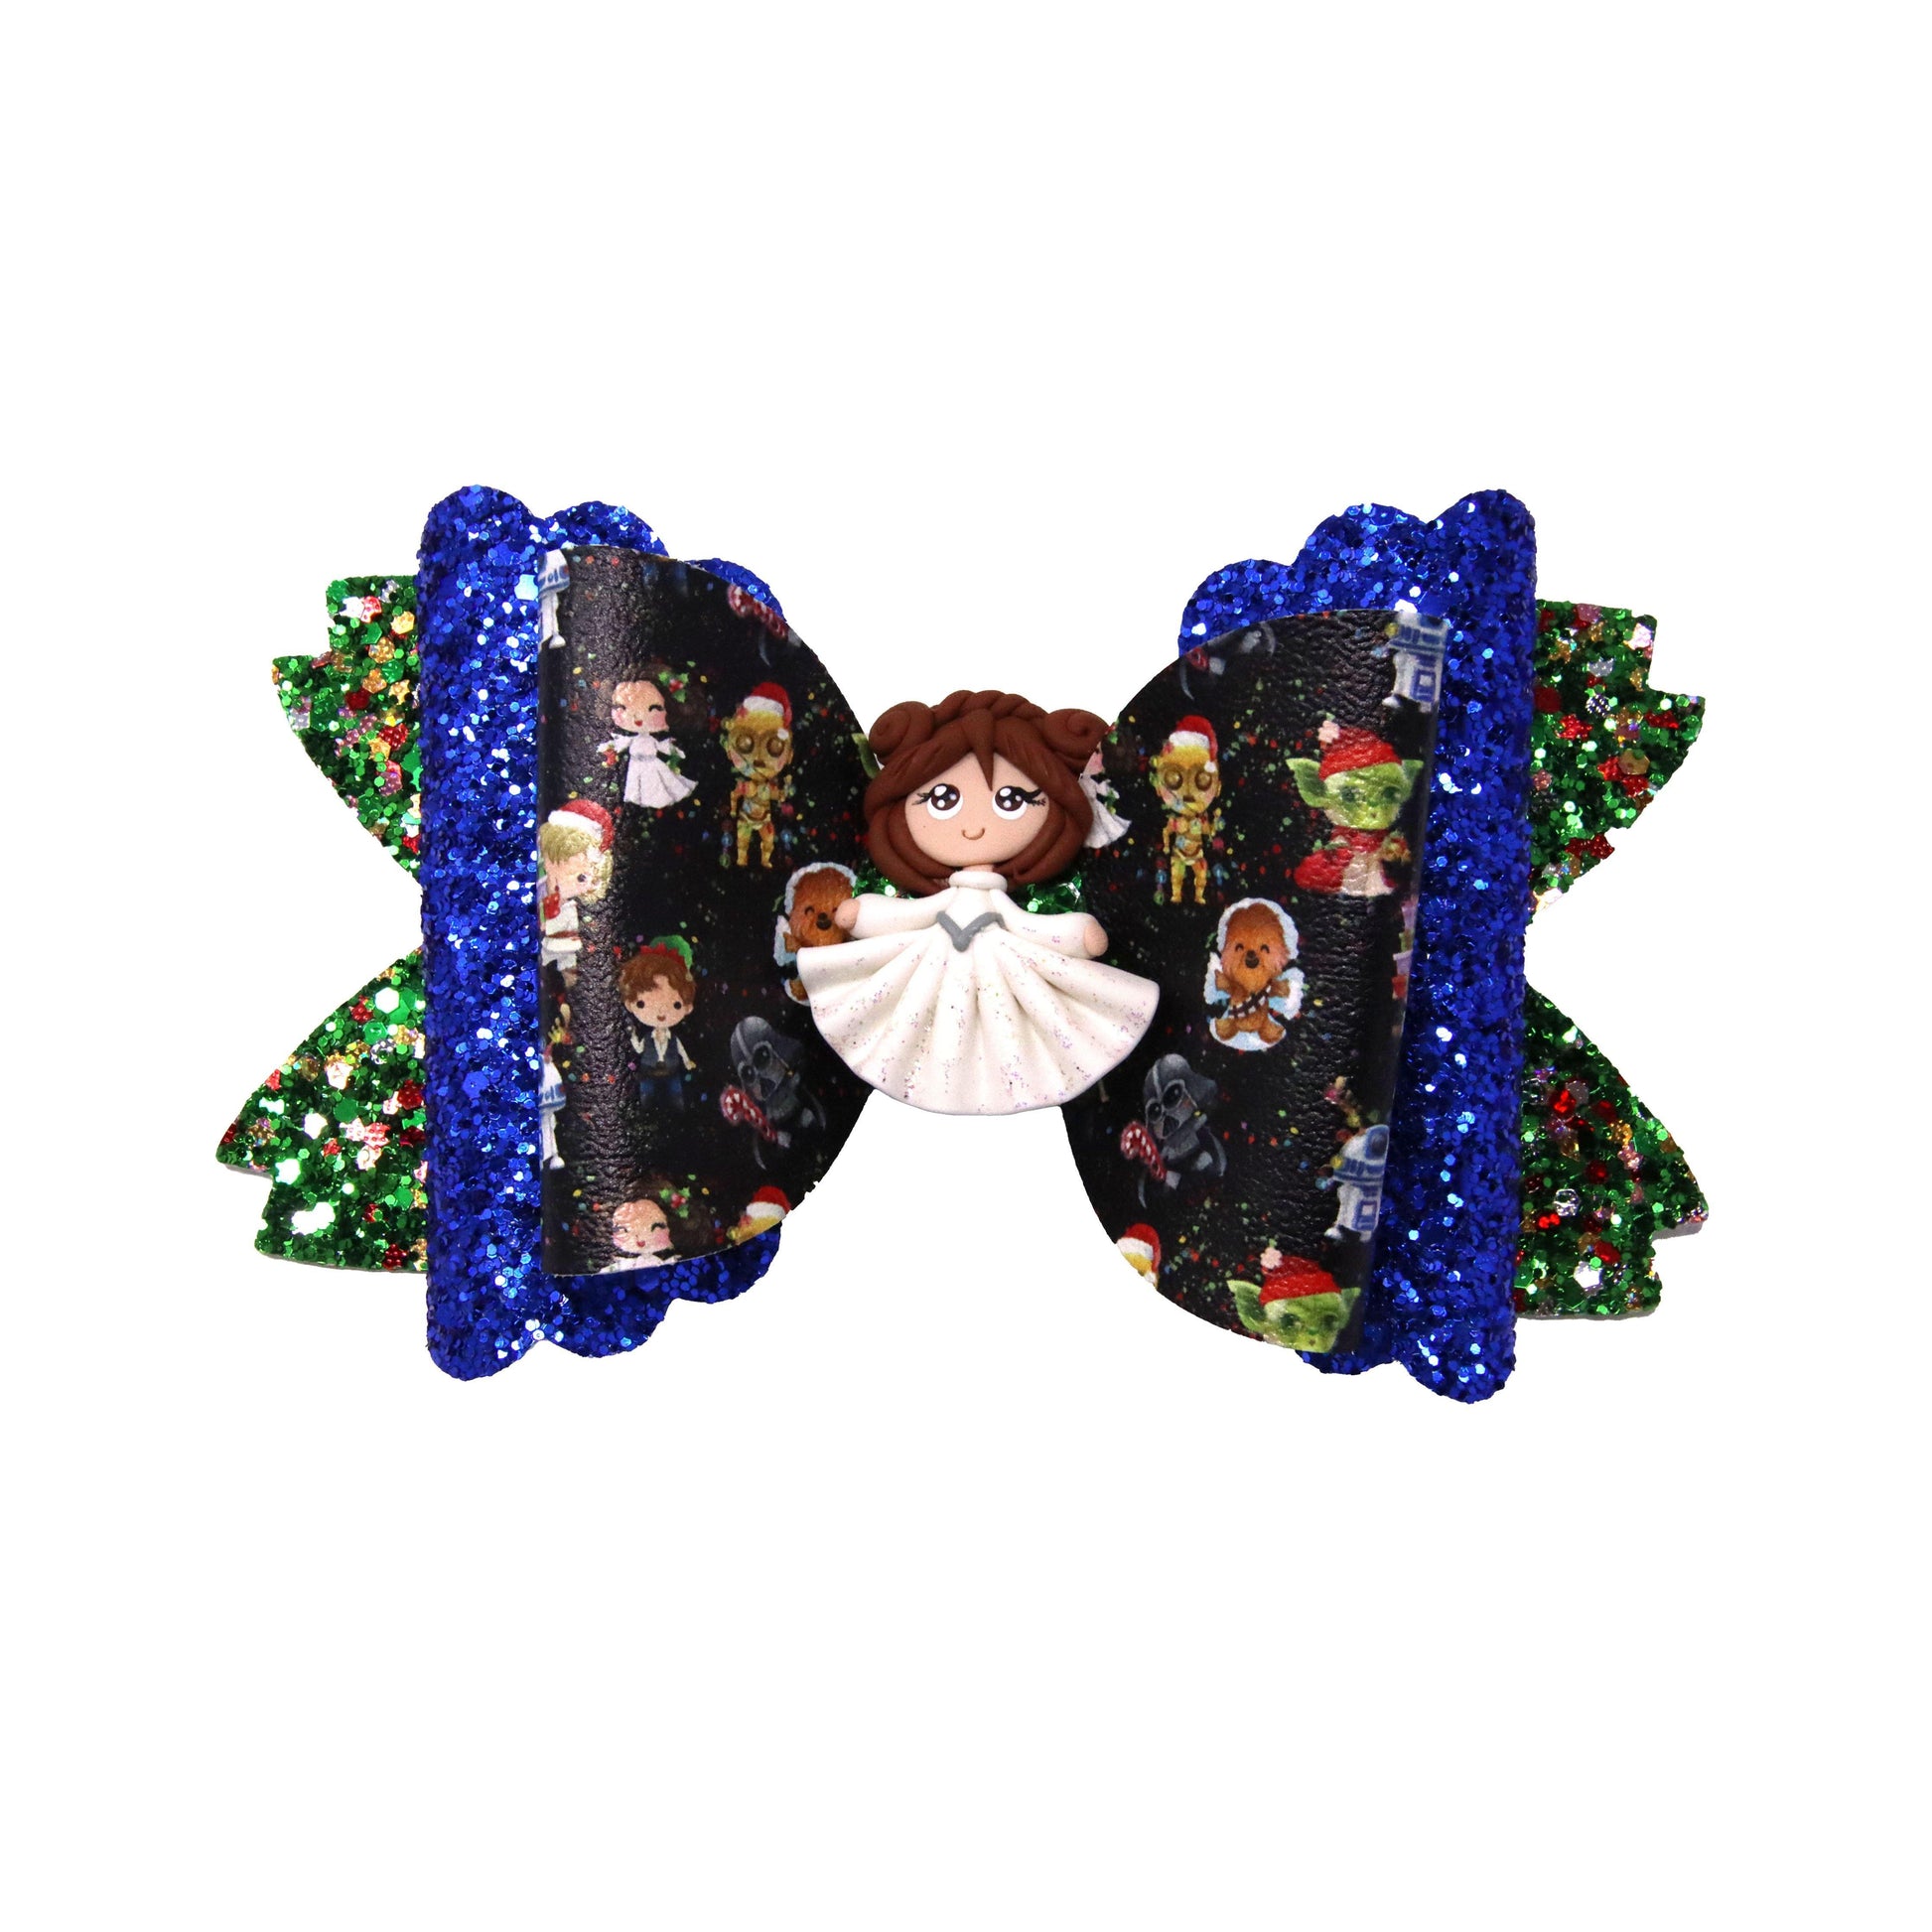 War of Stars Double Scalloped Daisy Bow 6" with Galaxy Princess Clay